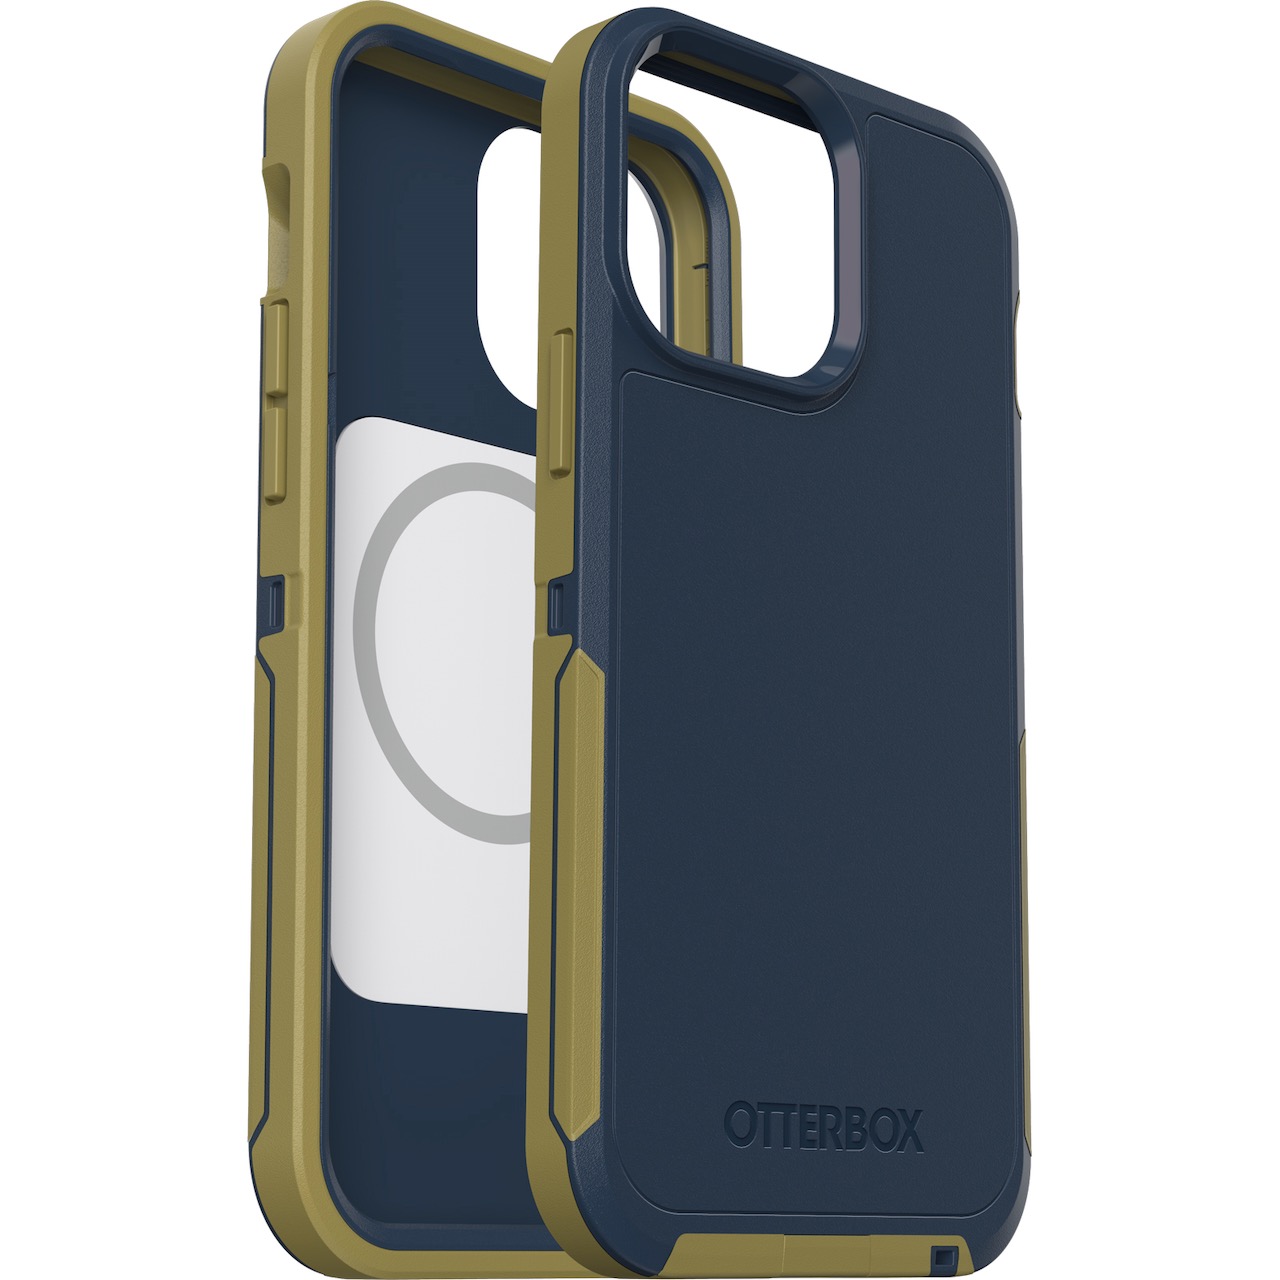 OtterBox full range of cases, chargers and accessories for new Apple iPhone 13 series in Singapore